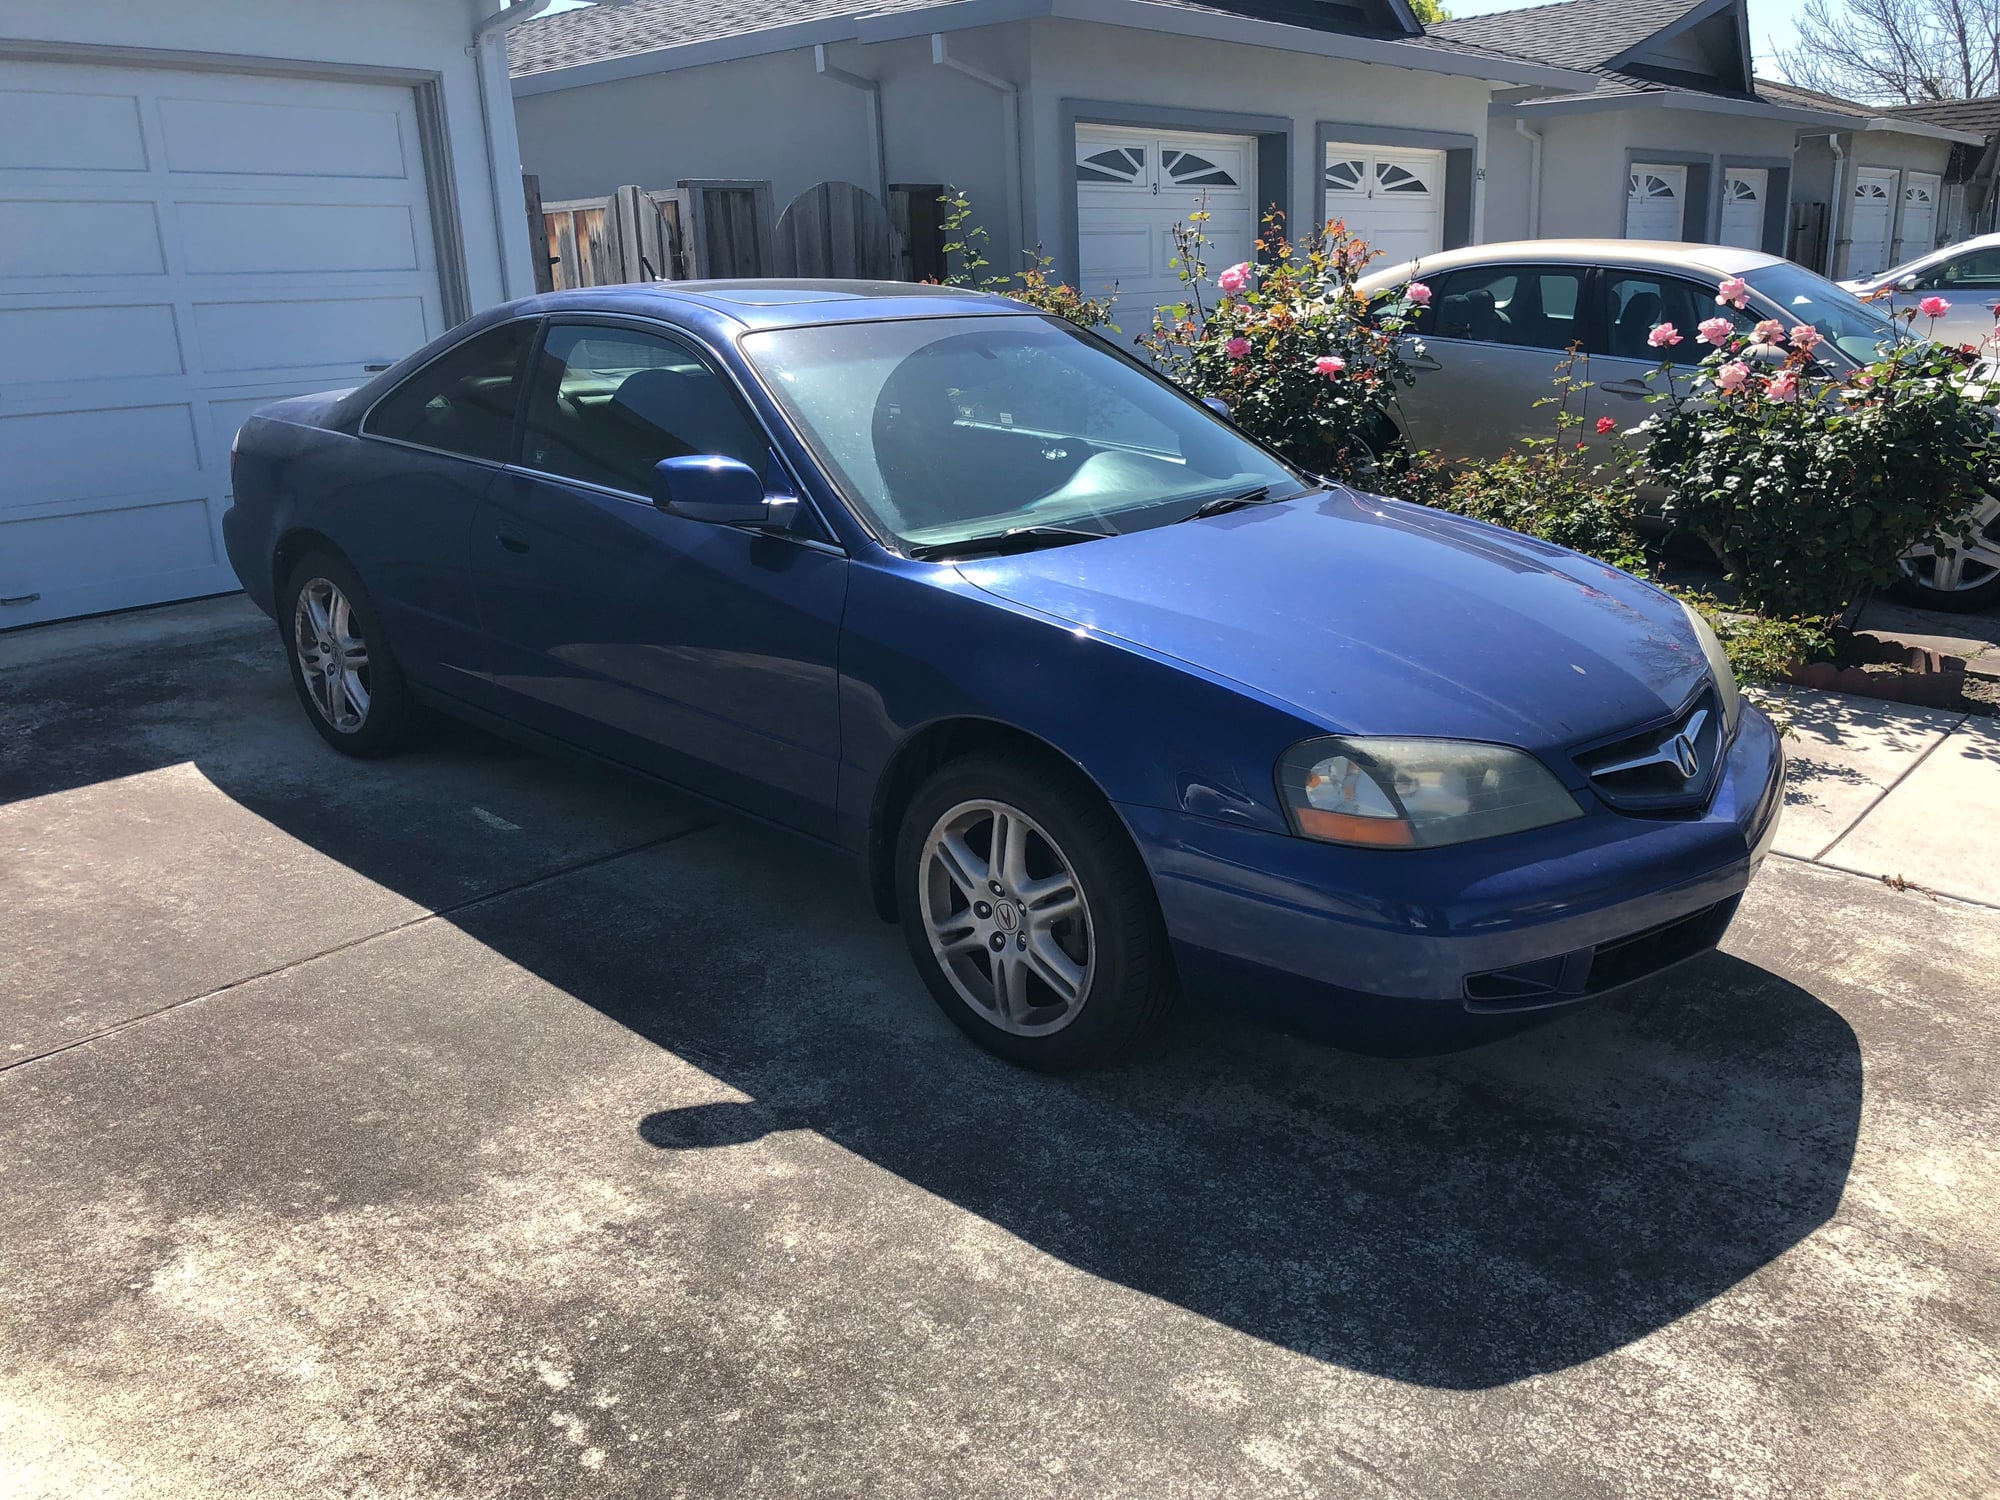 2003 Acura CL - FS: 2003 Acura CL Type S 6 Speed Manual - Used - VIN 19UYA41733A005857 - 185,000 Miles - 6 cyl - 2WD - Manual - Coupe - Blue - Santa Clara, CA 95050, United States